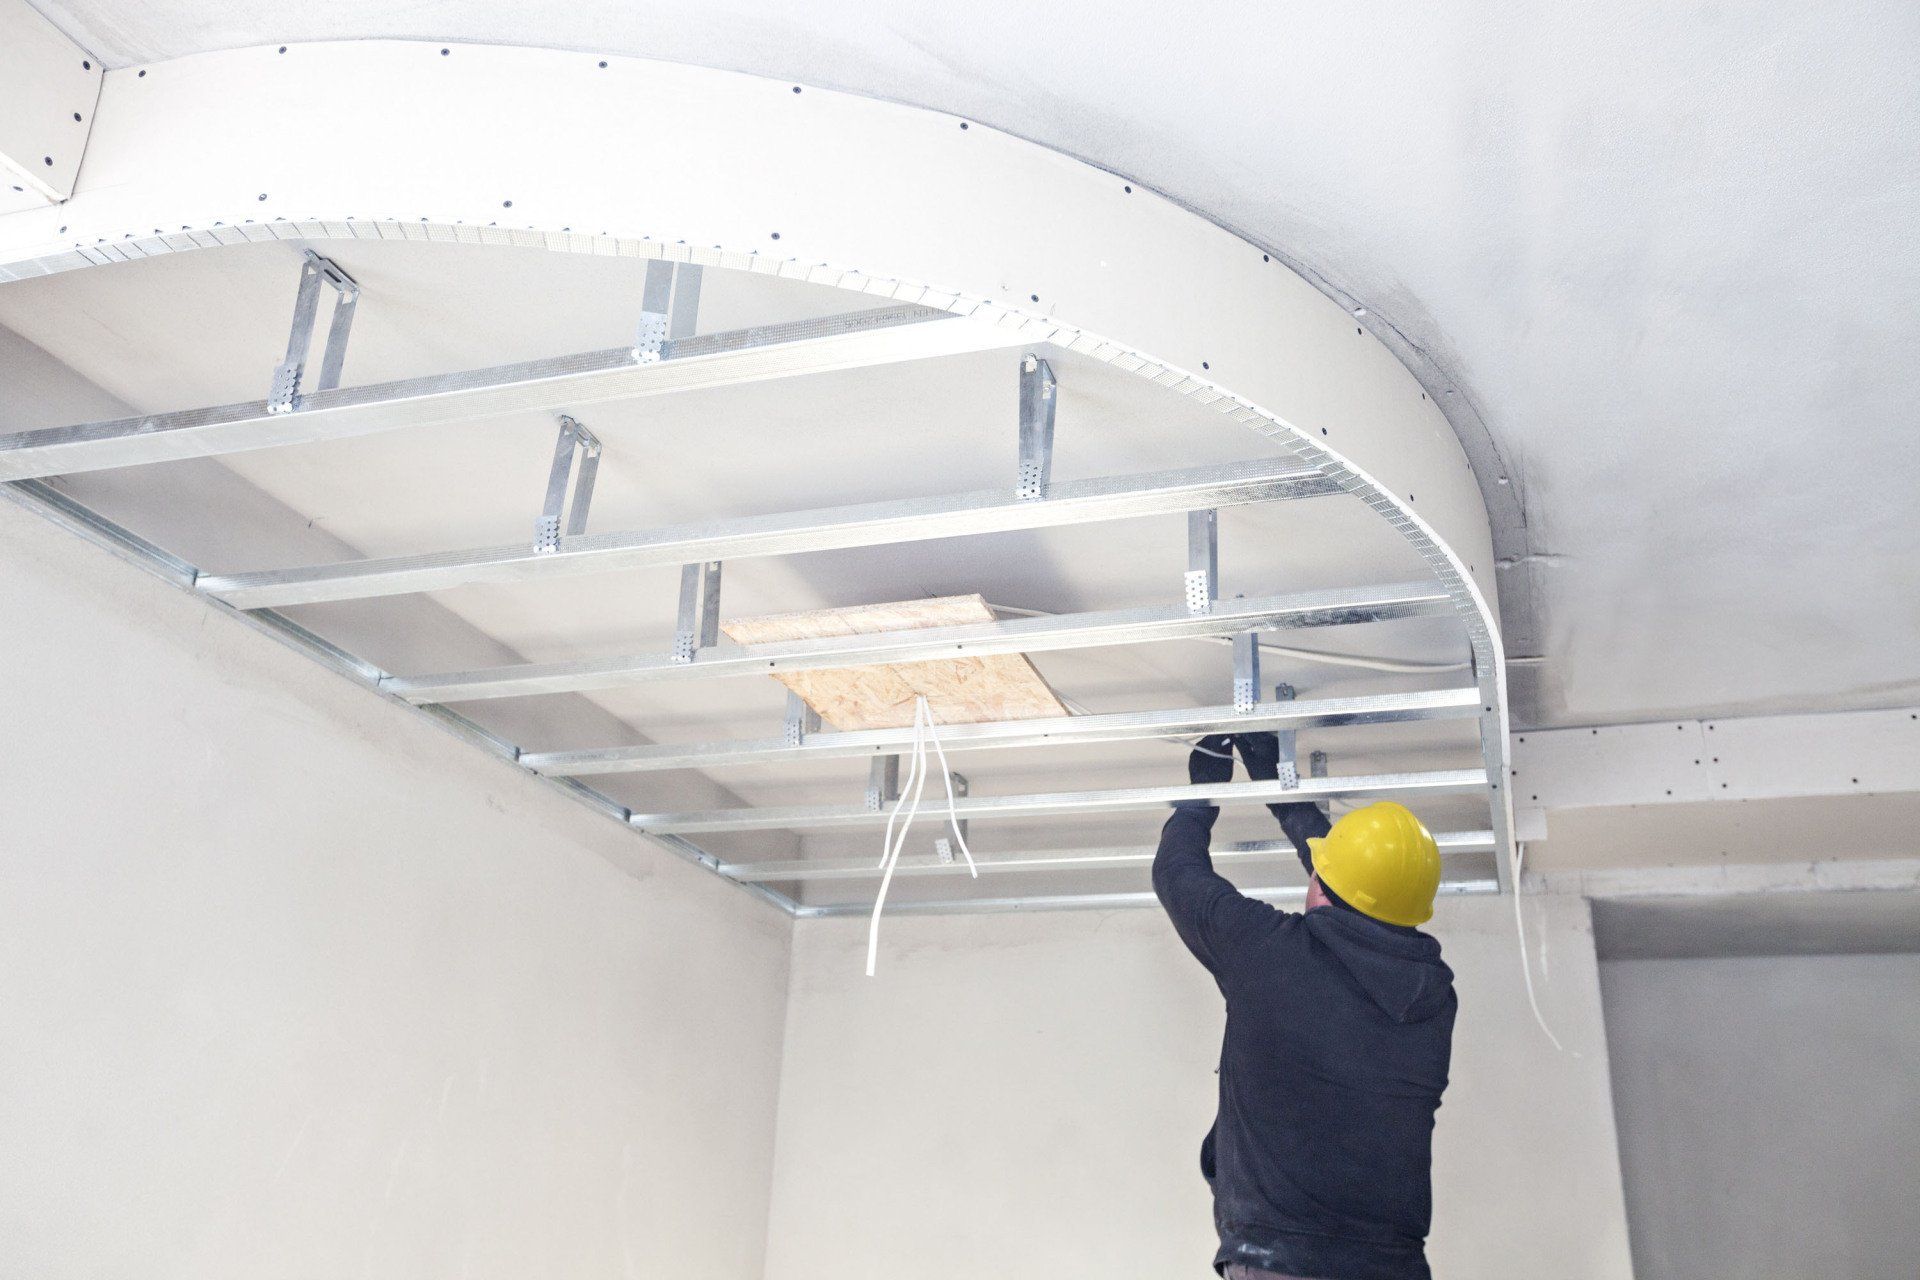 domed ceiling kits